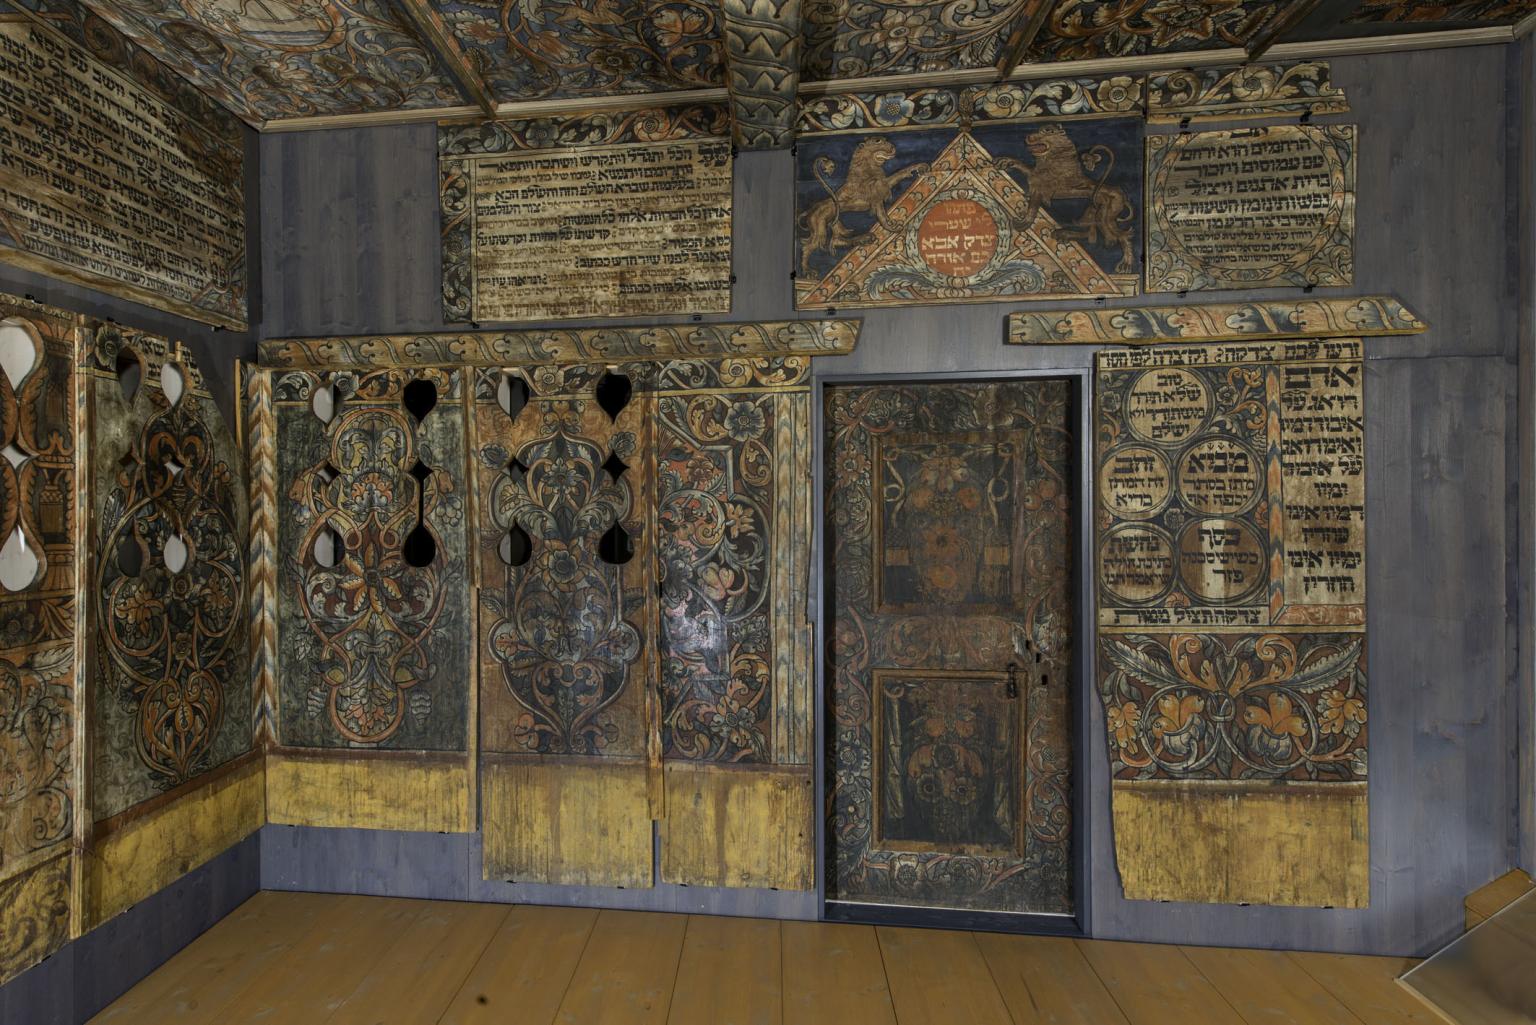 Photograph of room with wood walls painted with Hebrew text, animals, and floral designs.